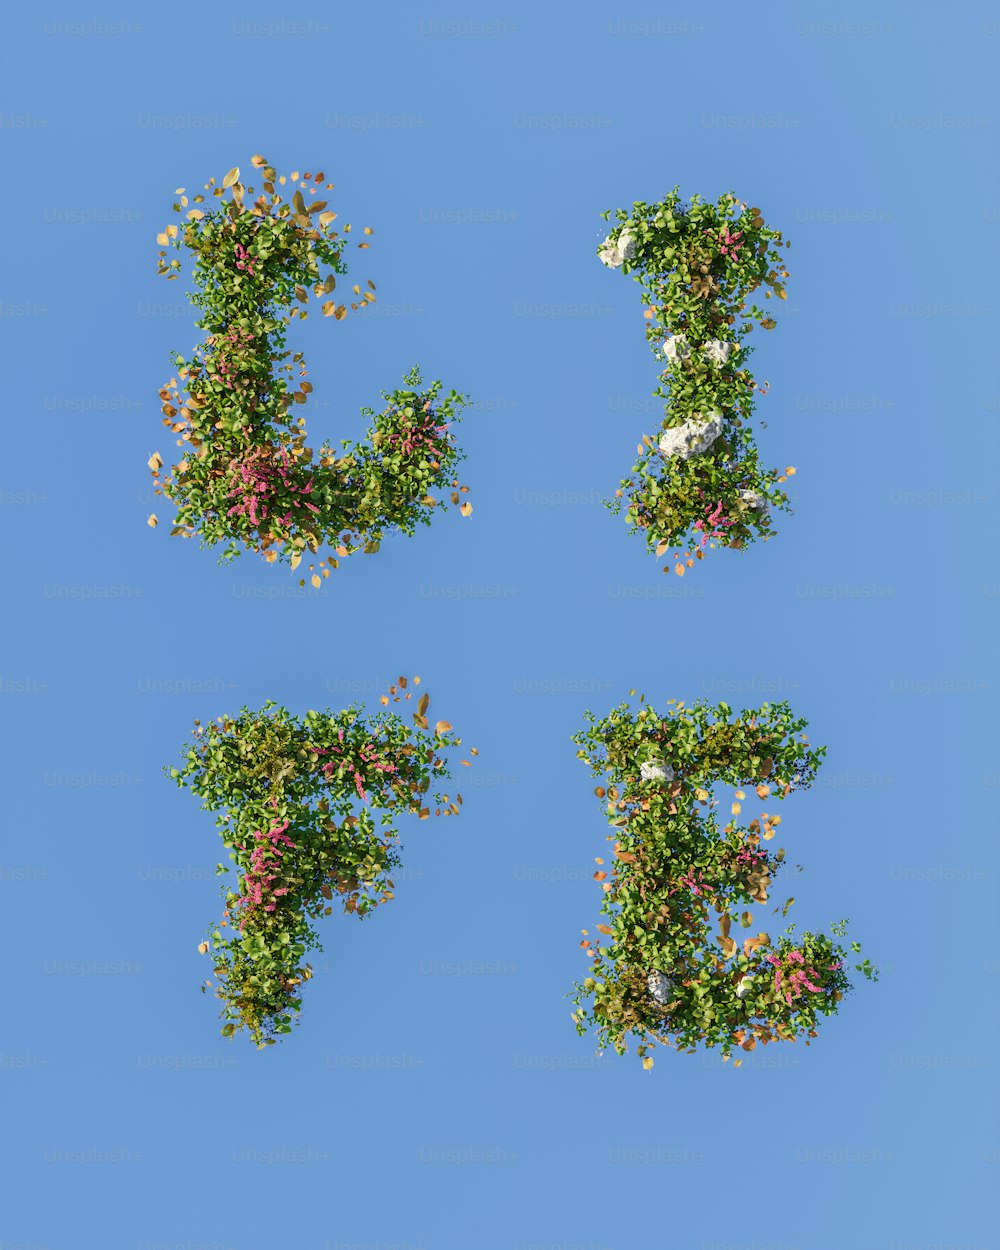 the letters e, f, and f are made out of flowers